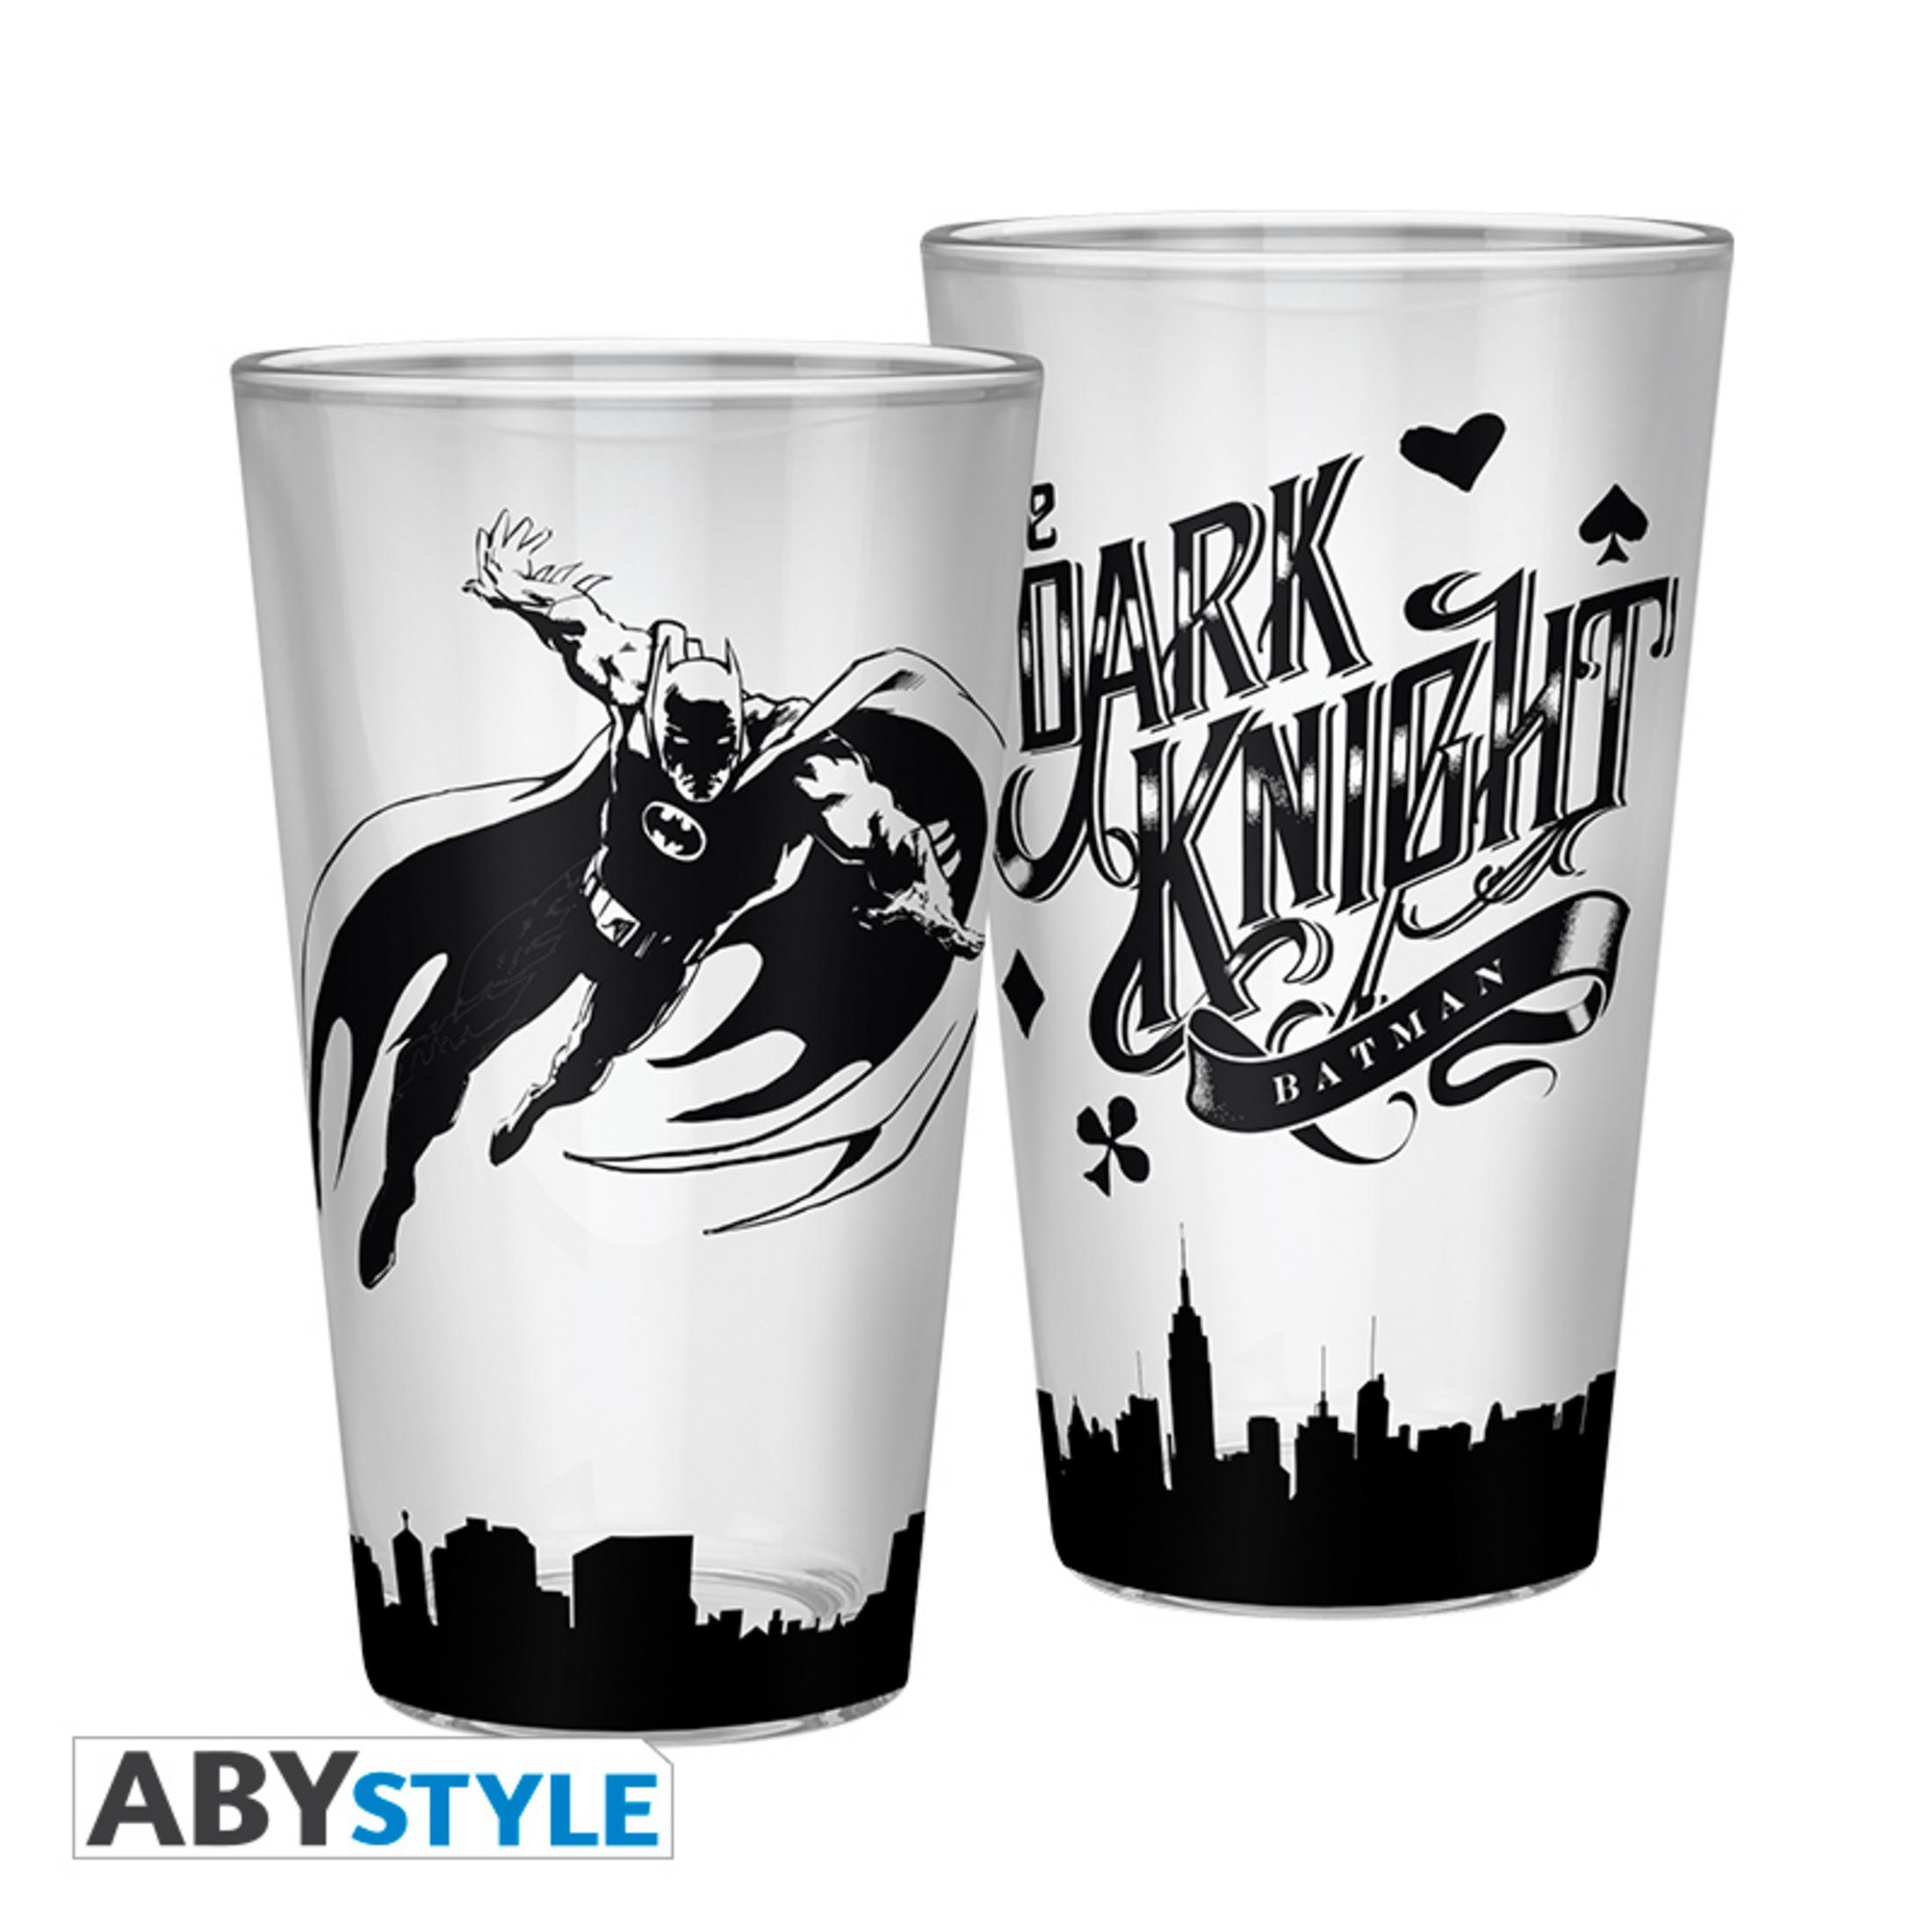 ABYVER126 DC BATMAN DRK GLAS 500ML NGHT